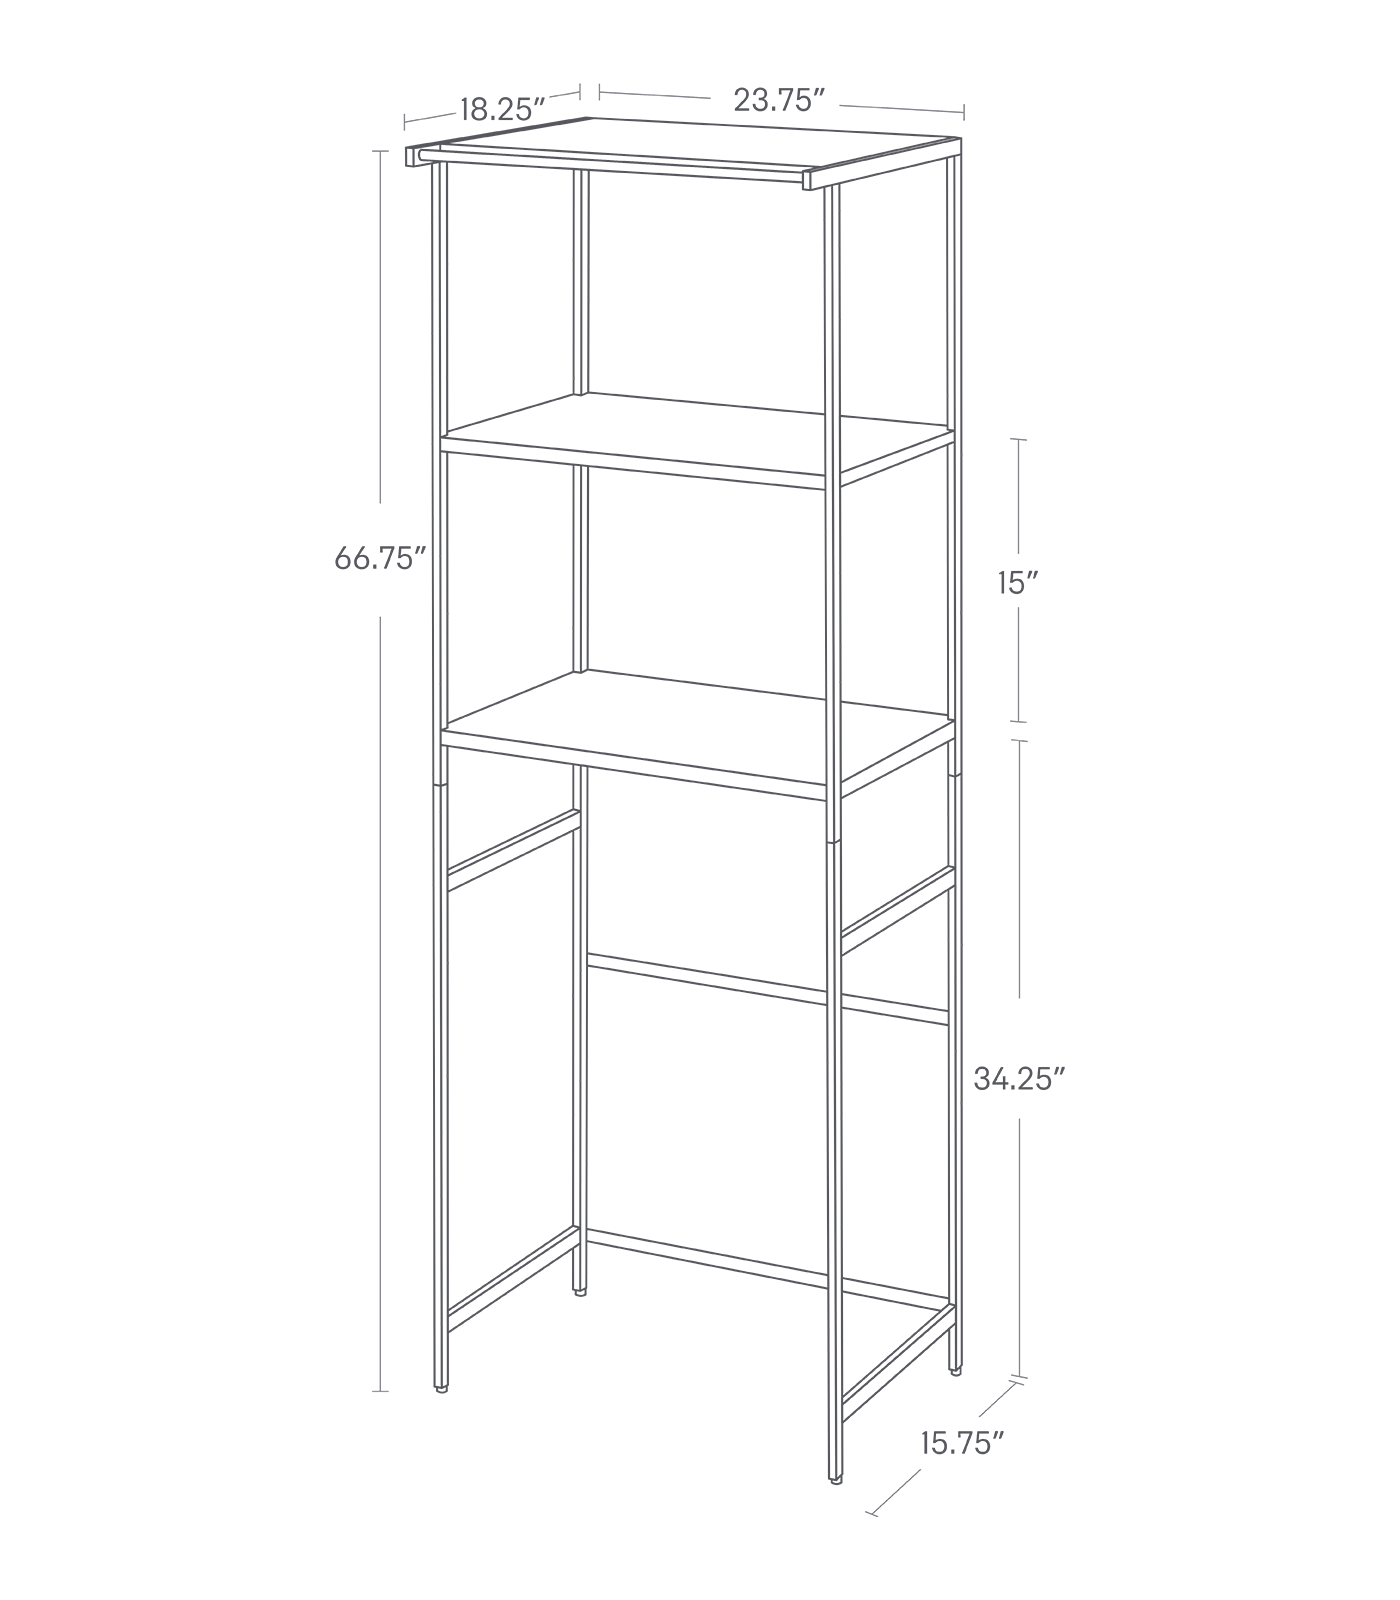 Dimension image for Storage Rack - Three Sizes on a white background including dimensions  L 18.31 x W 23.62 x H 66.93 inches